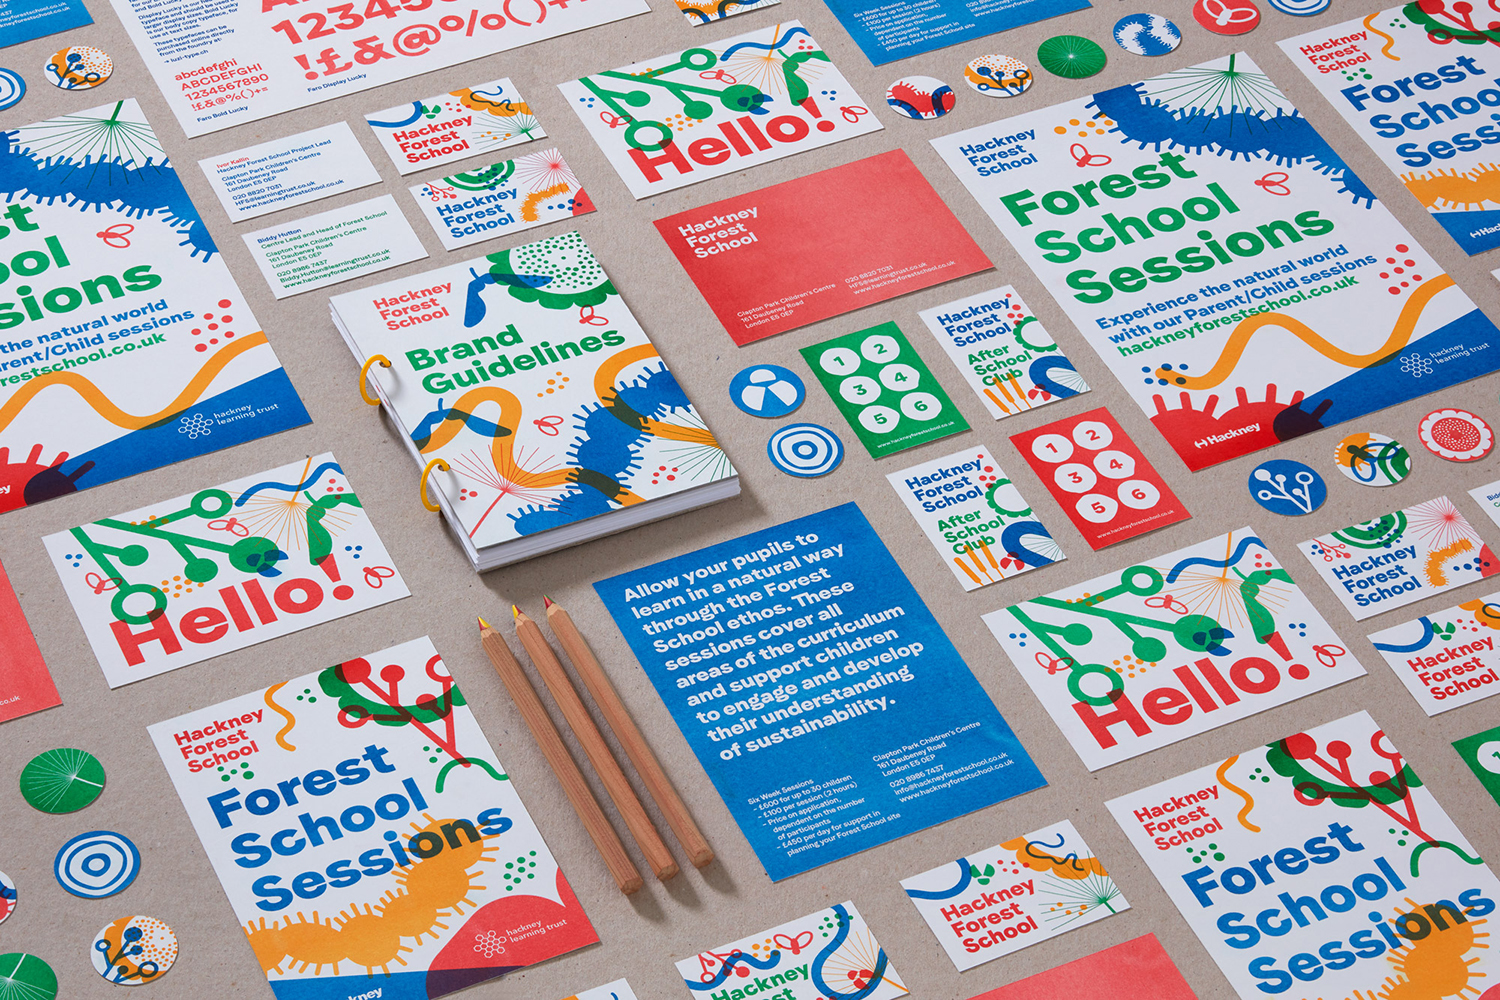 Logo, visual identity, posters and brand book designed by Spy for Hackney Forest School